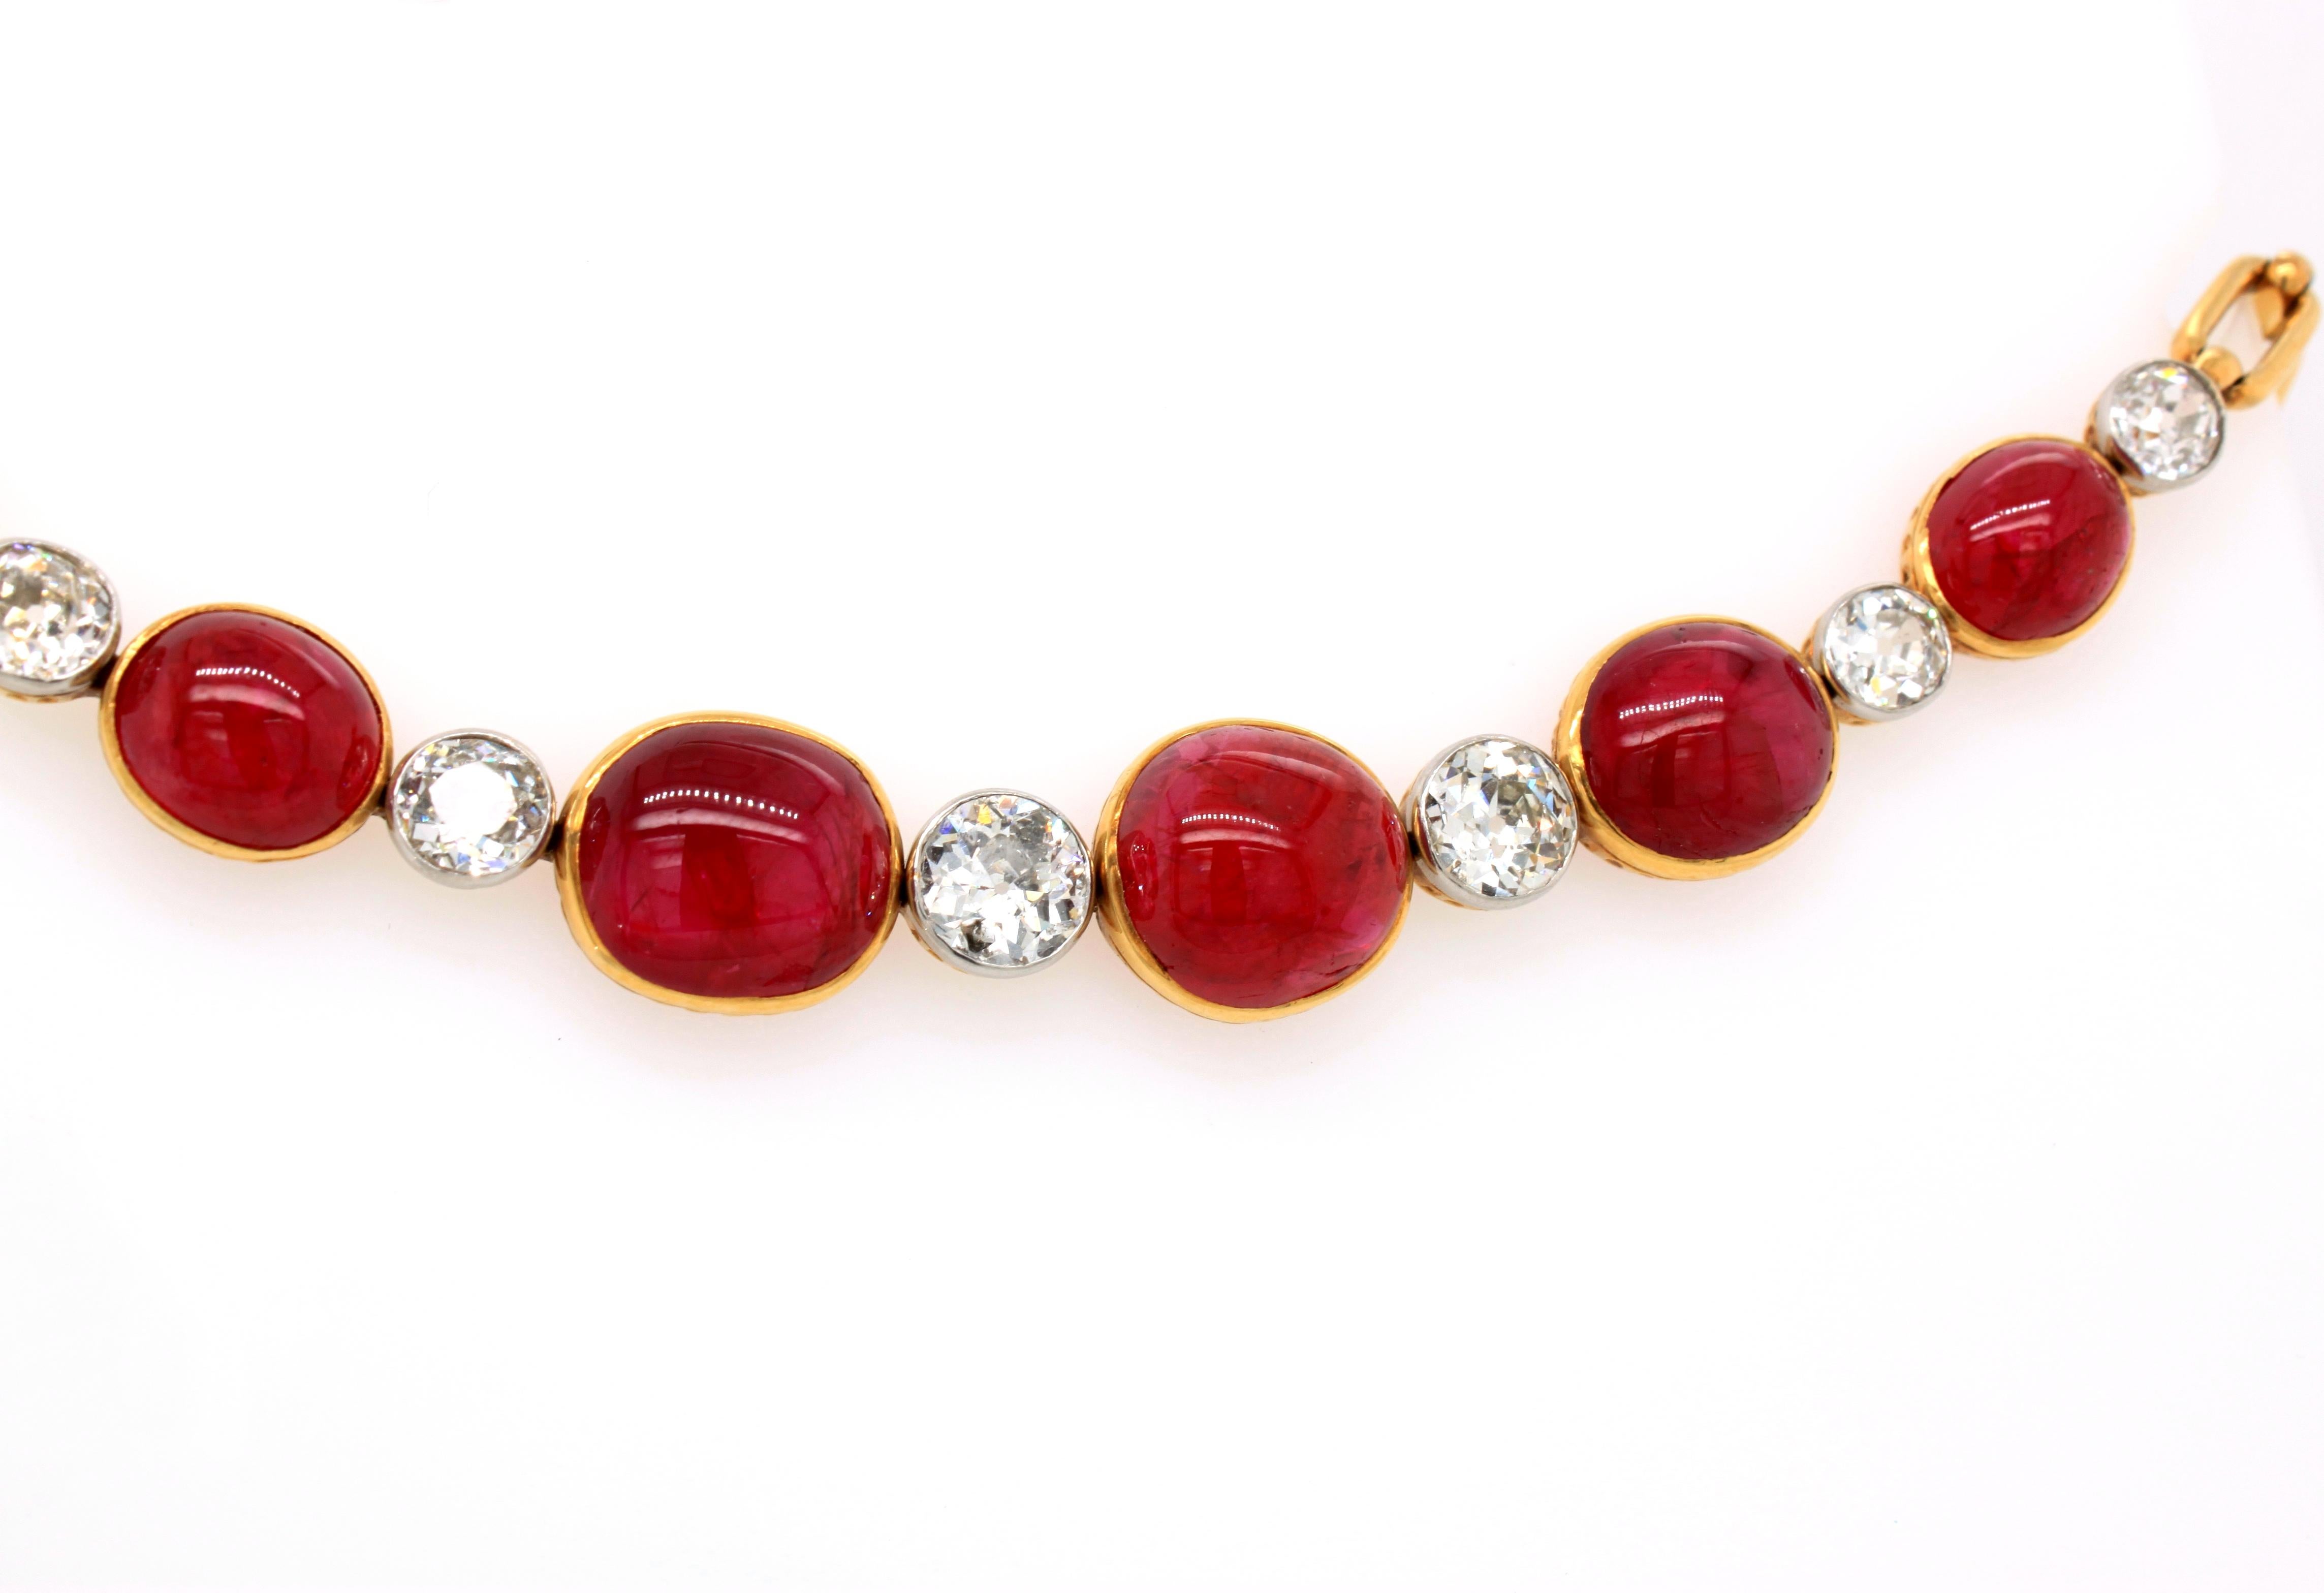 Women's Burmese Ruby Cabochon and Old Cut Diamond Necklace/Bracelet, circa 1890s For Sale